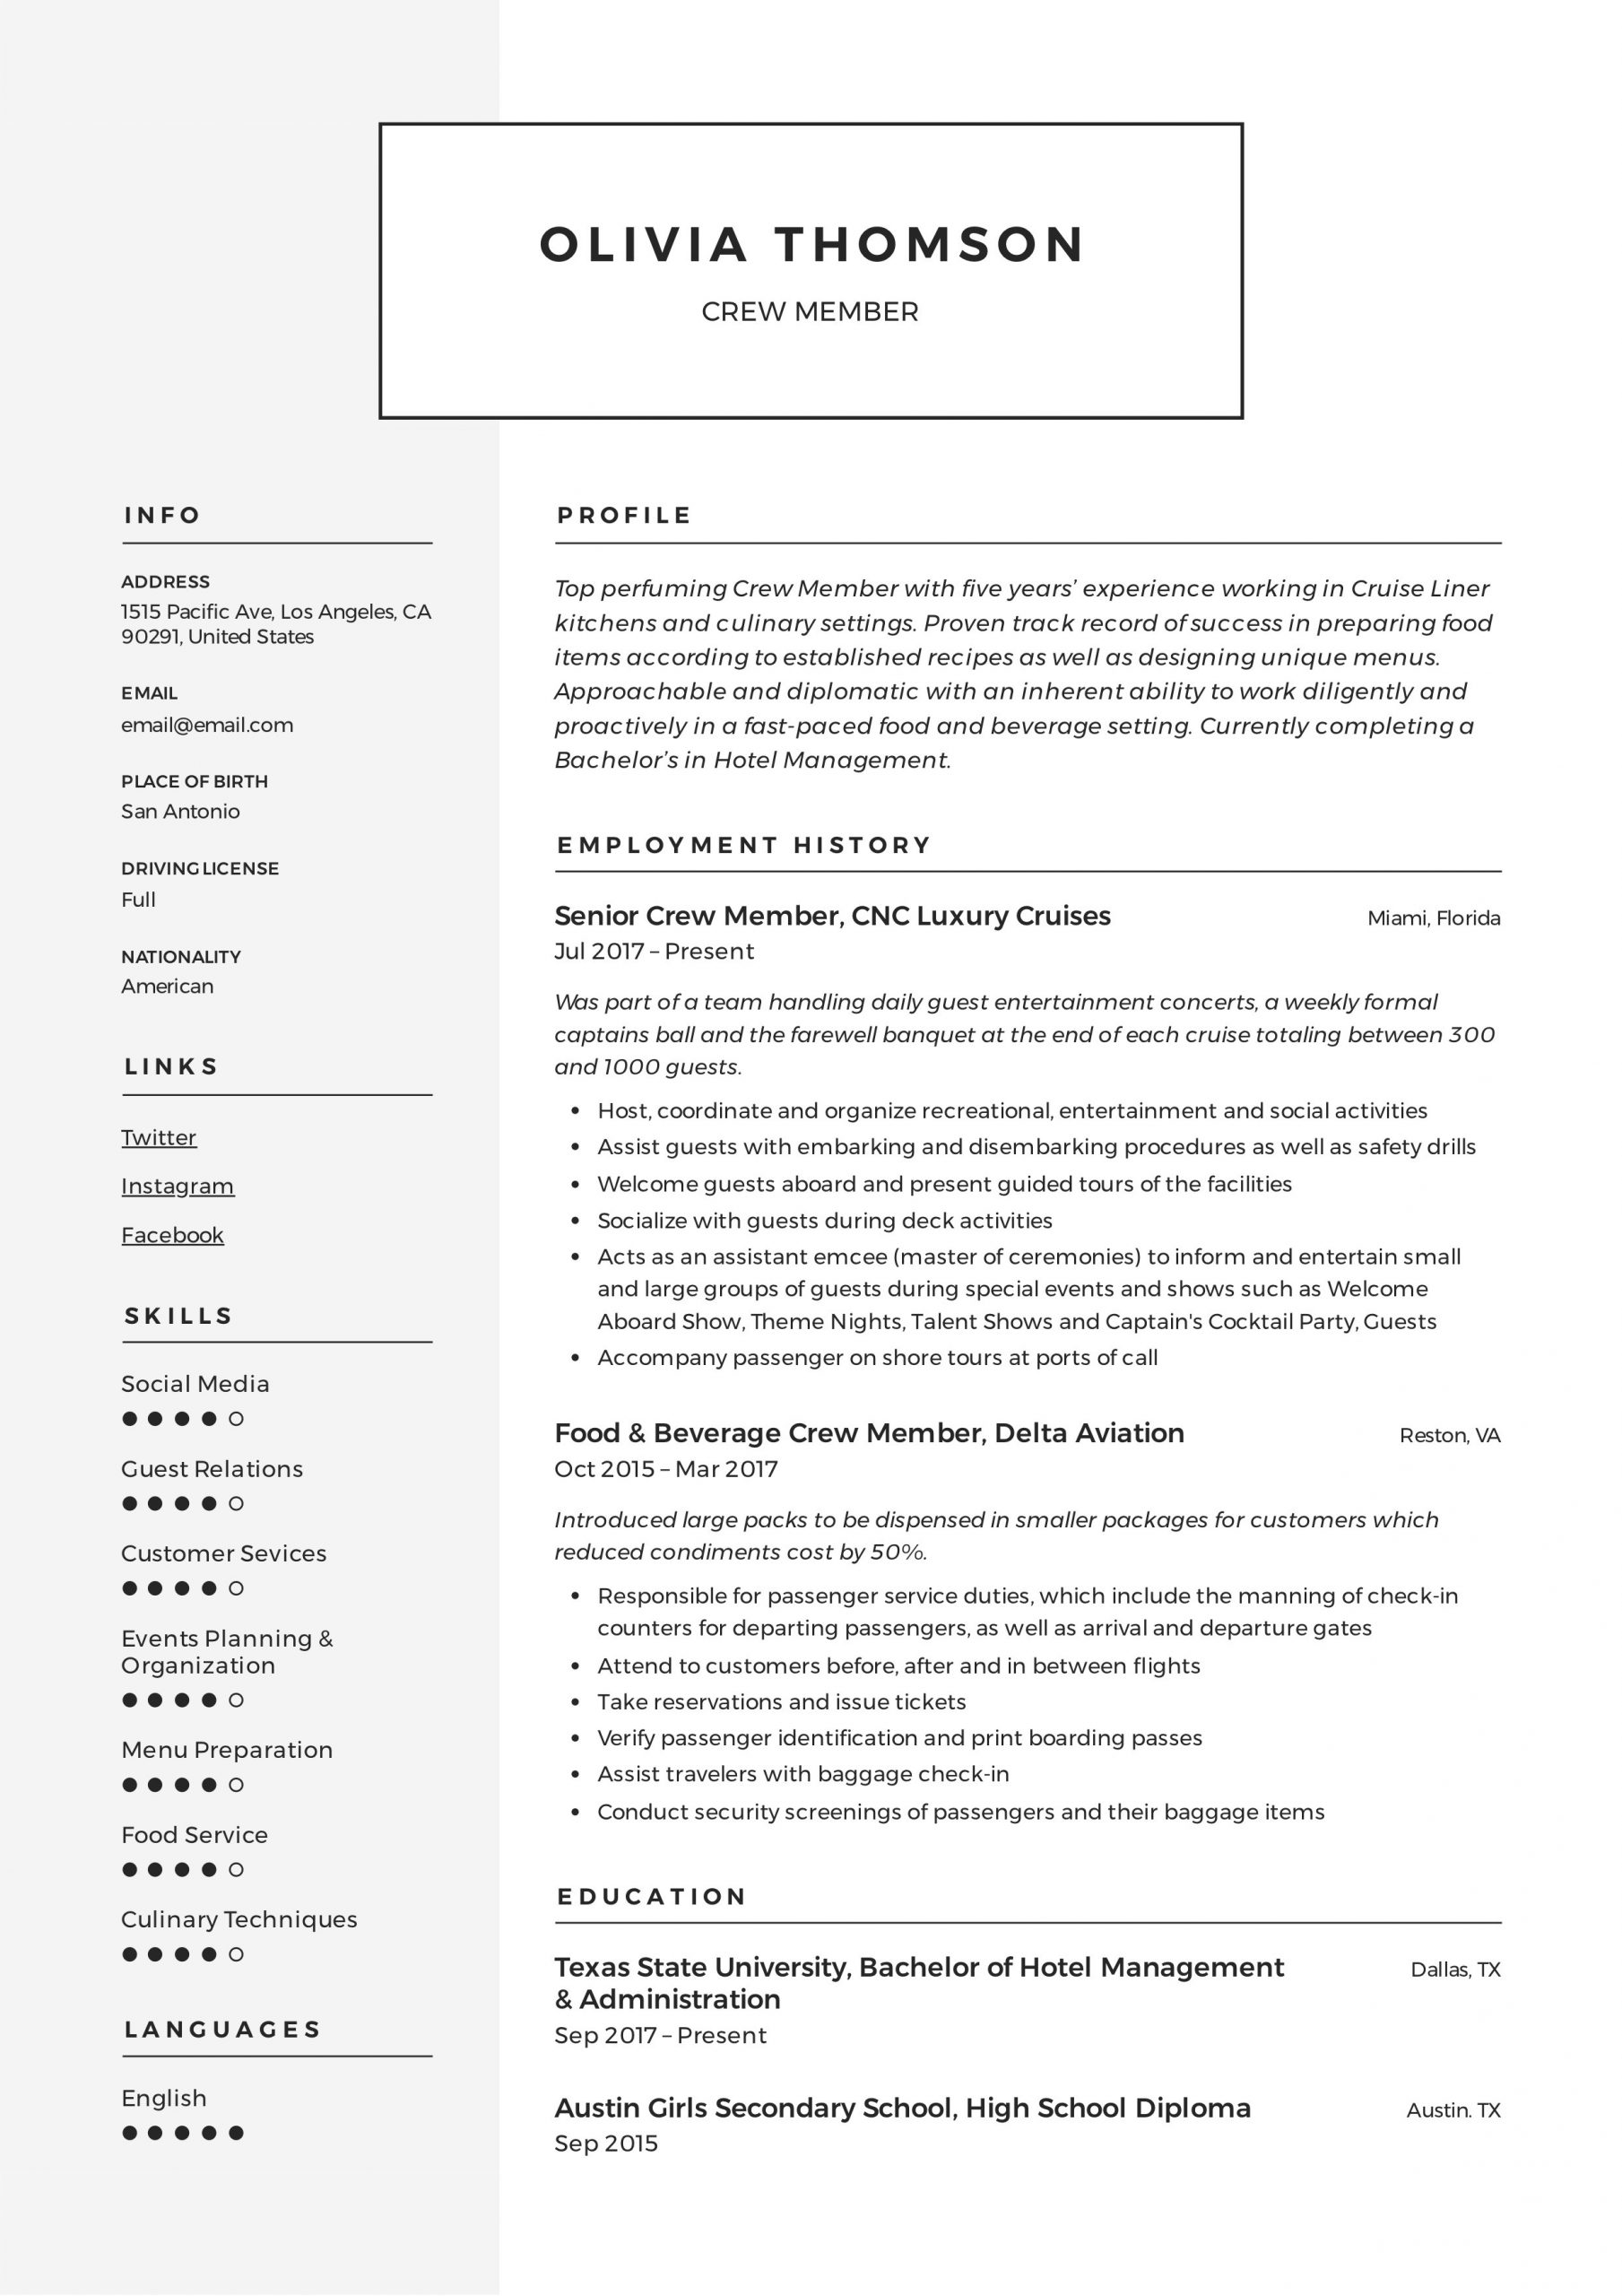 Sample Resume for Fast Food Crew without Experience Philippines Crew Member Resume & Writing Guide